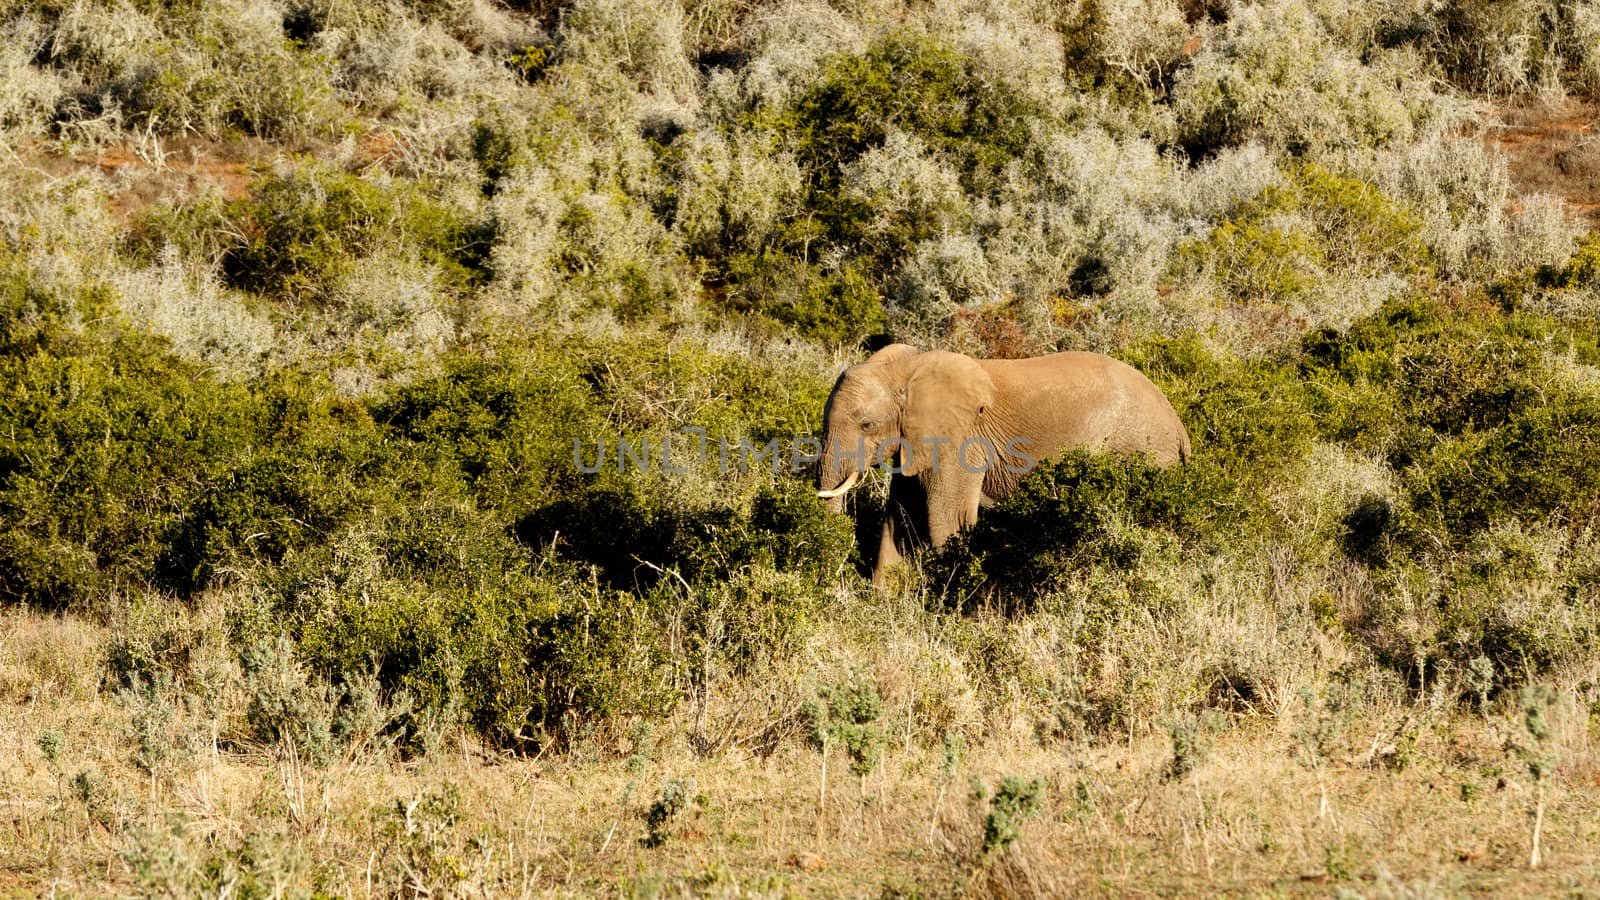 African bush elephant standing in a Big field with lots of bush surrounding him.